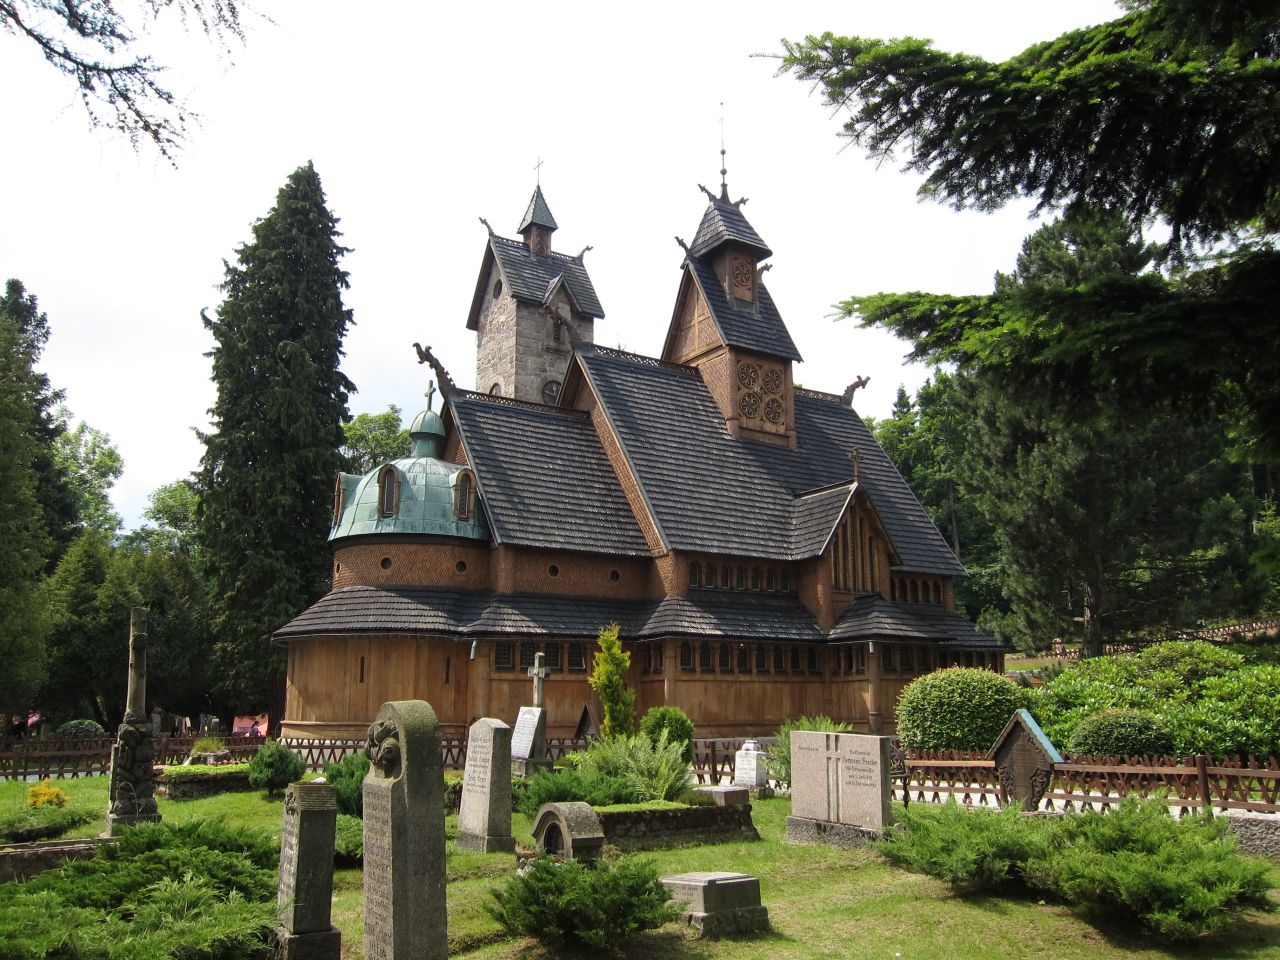 The Norwegian wooden church of Vang was transplanted to Poland in the mid 19th century.